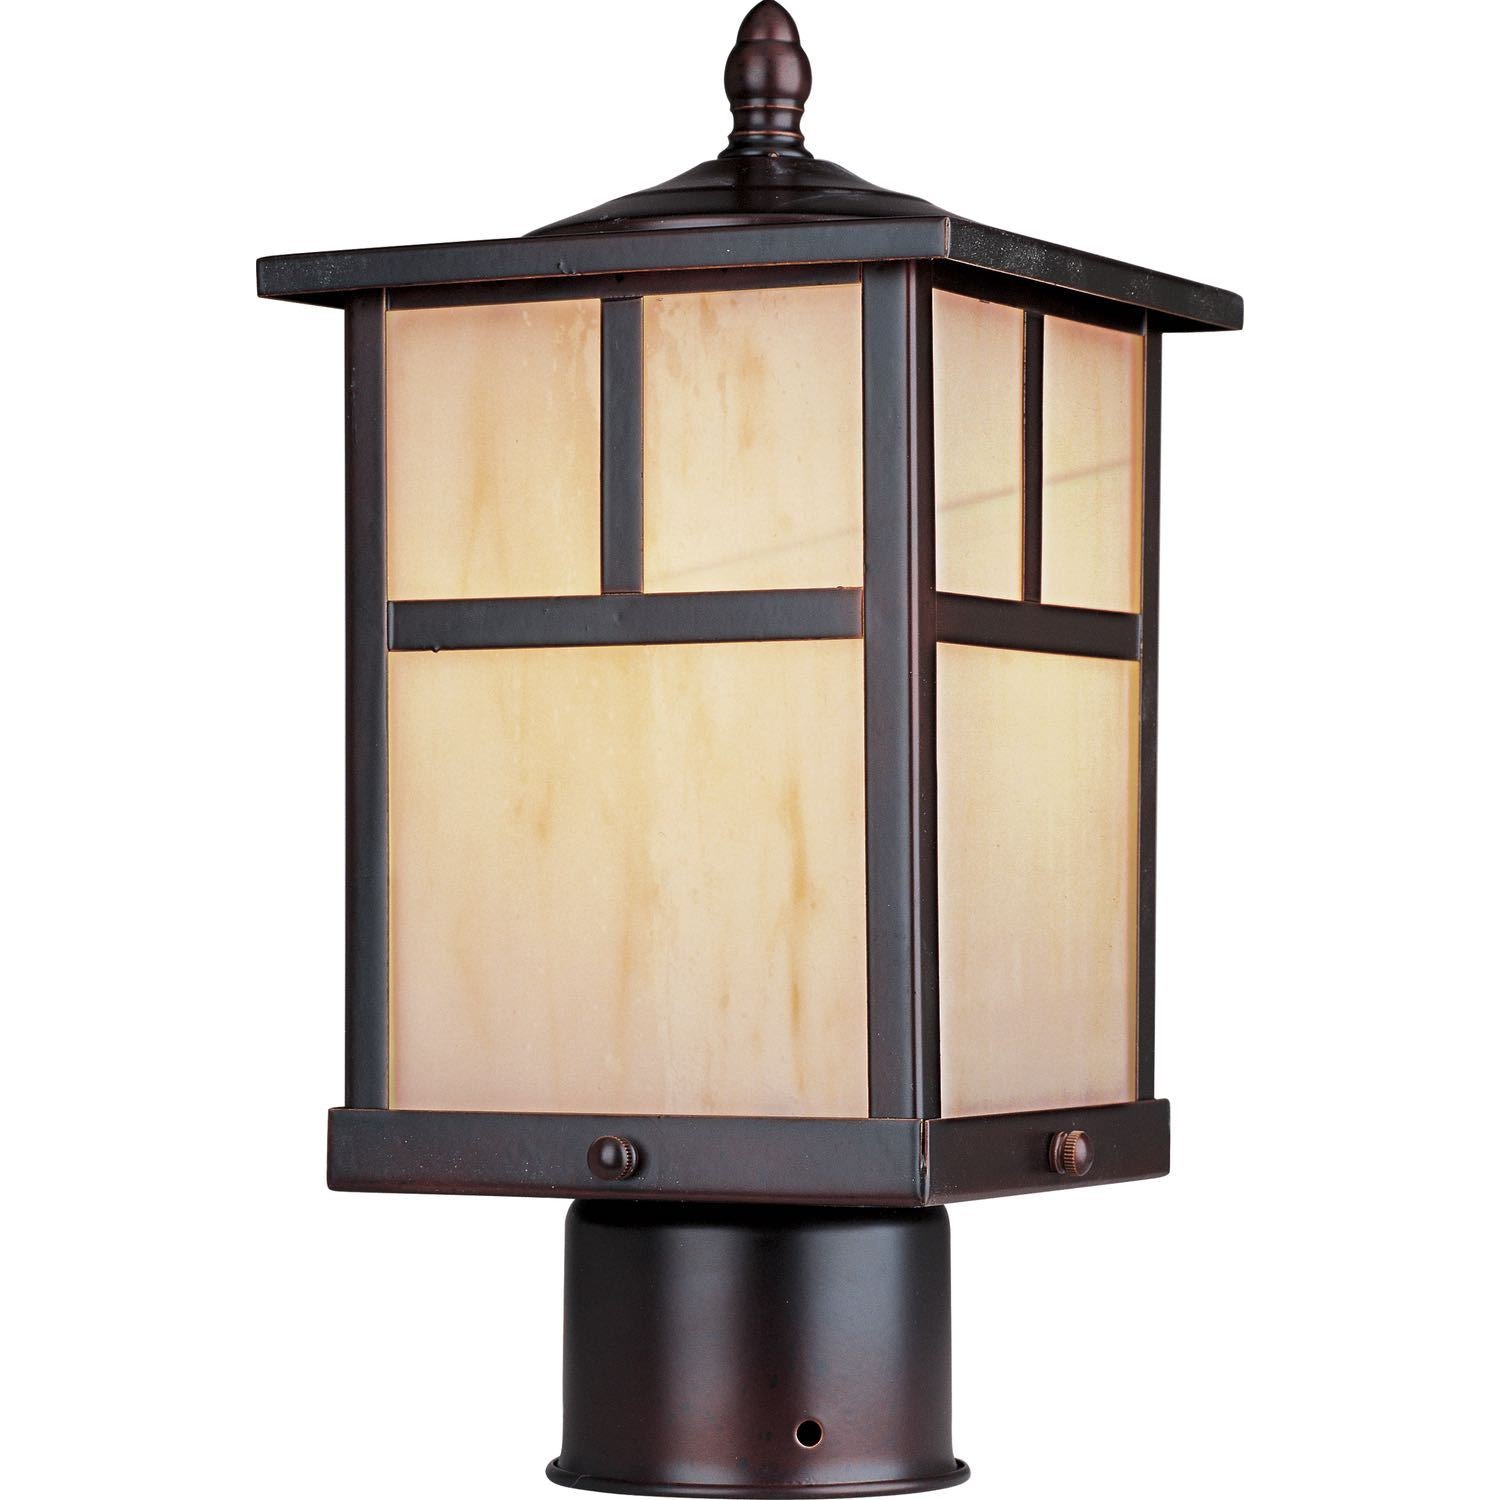 Coldwater Post Light Burnished